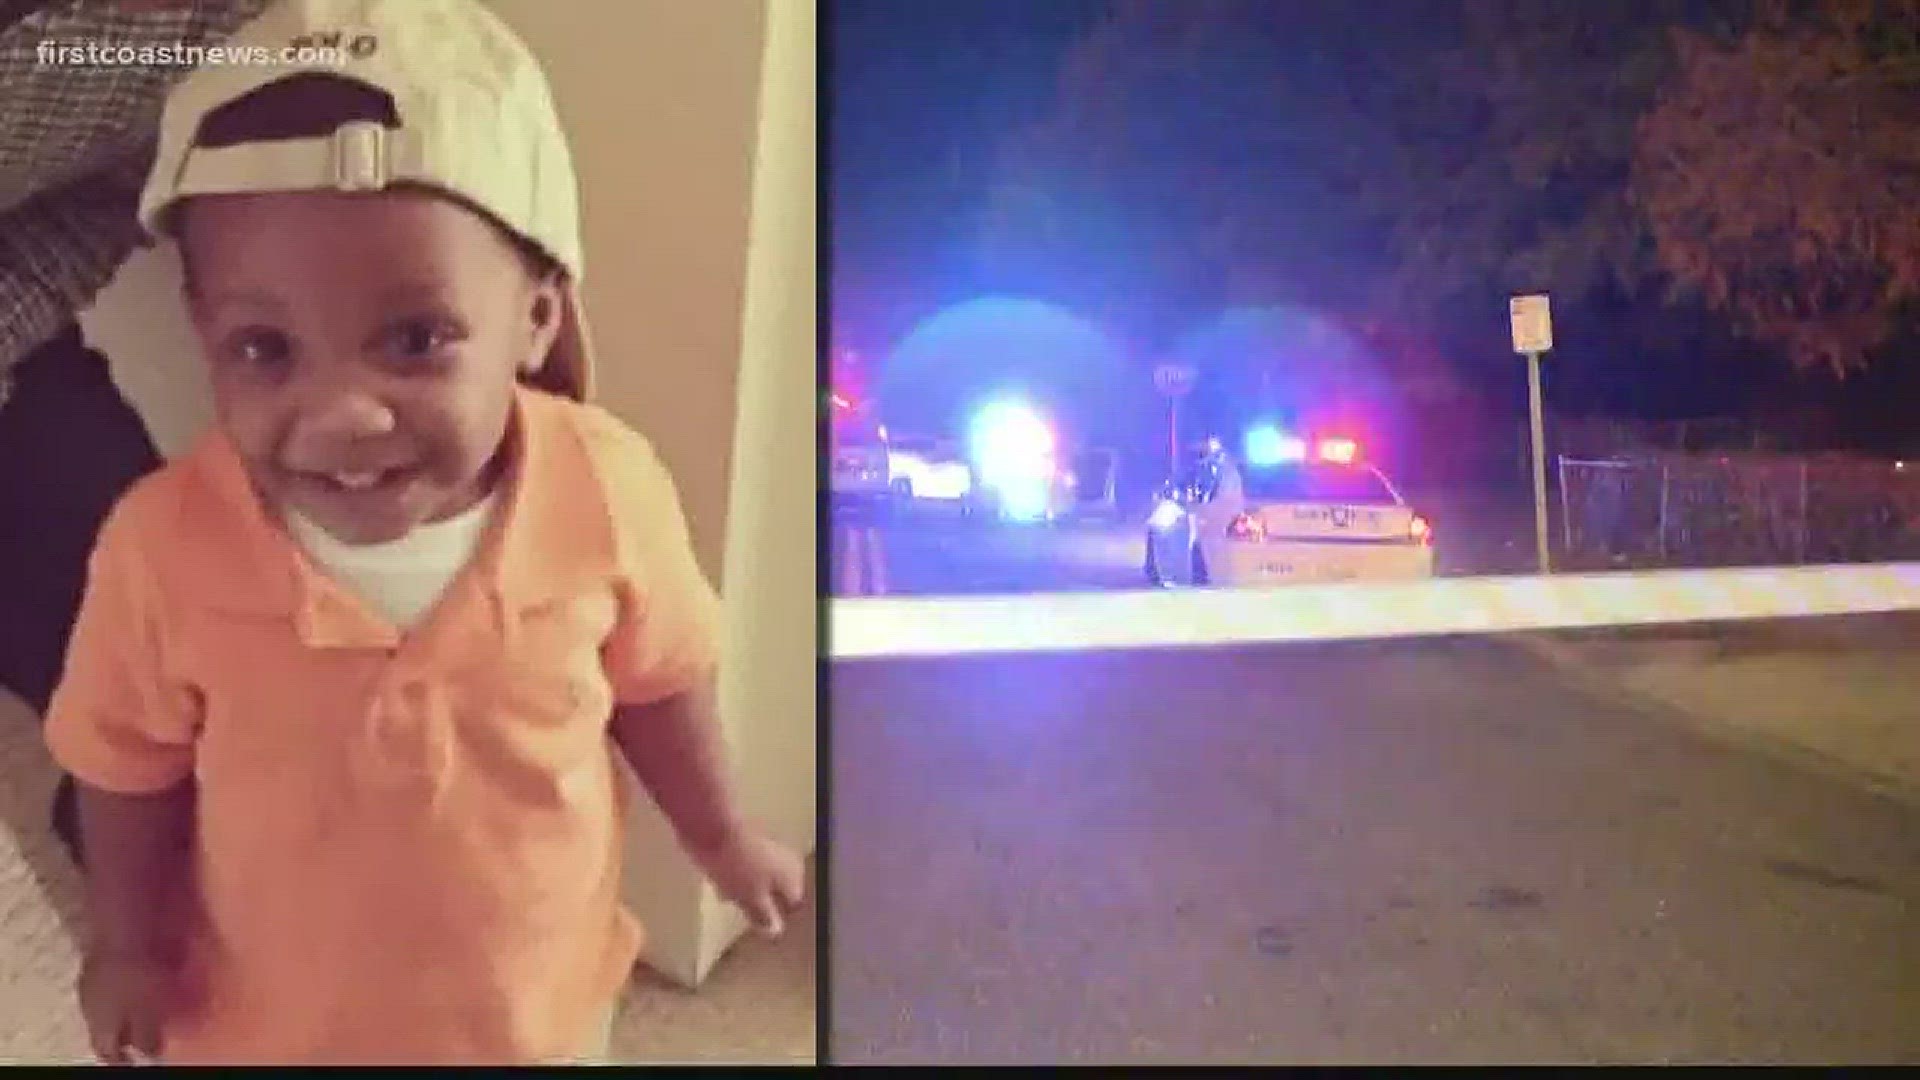 22-month-old Aiden McClendon died at his home after he was caught in the crossfire of a gang member shooting, according to authorities.